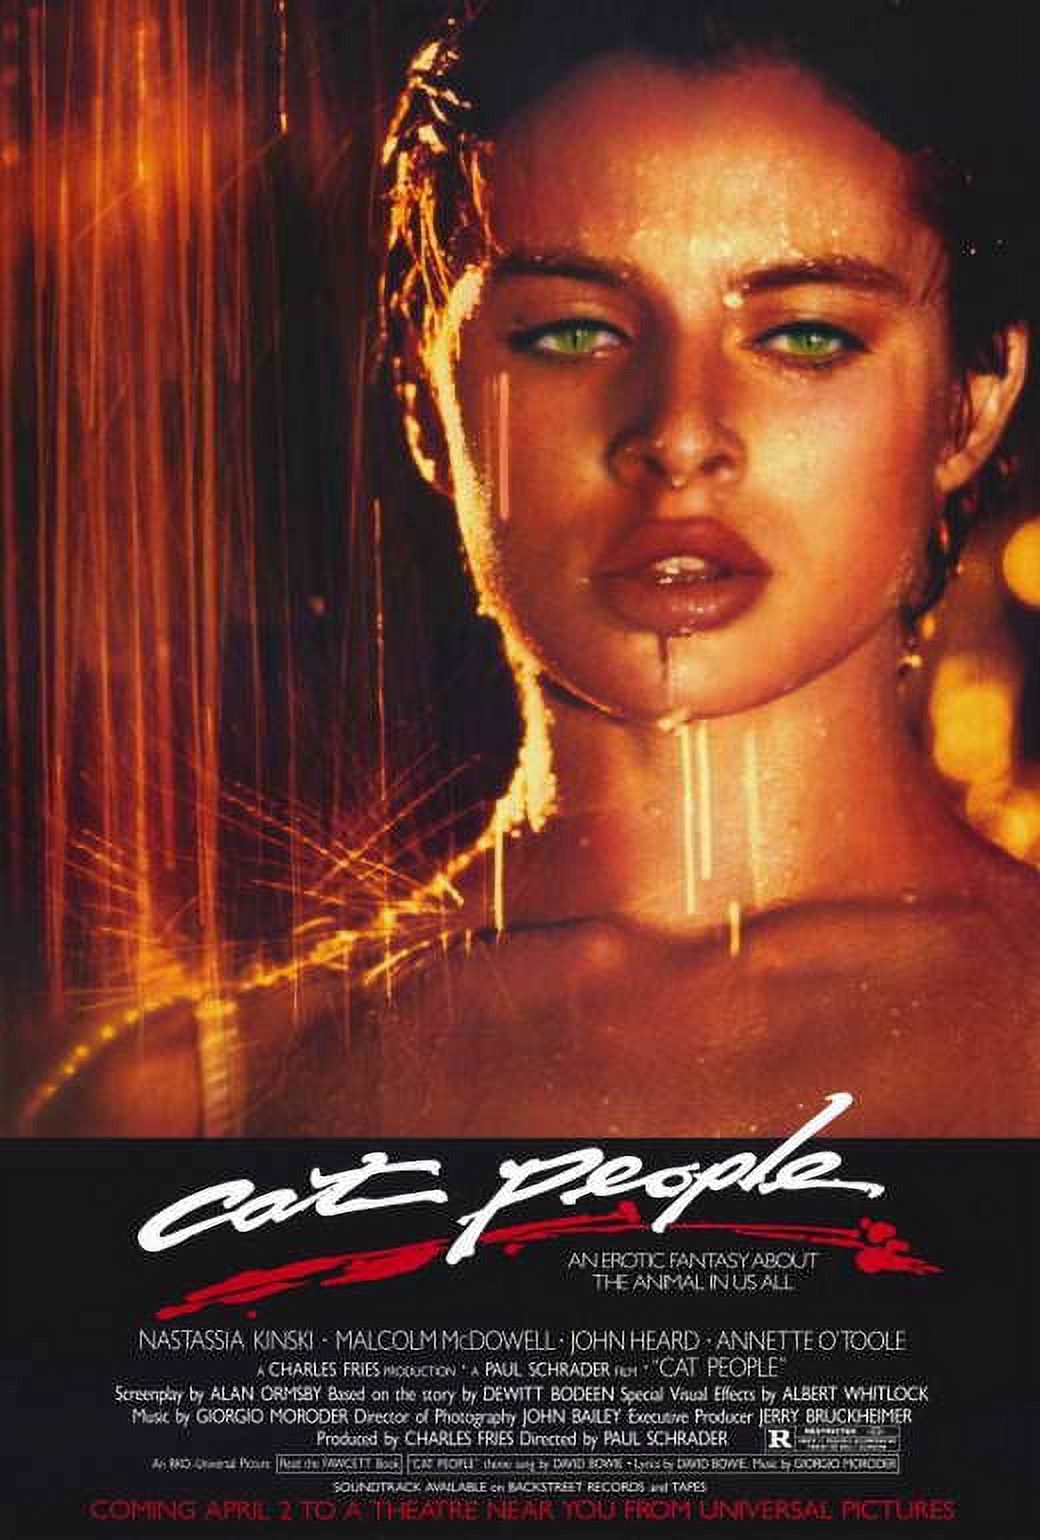 Cat People - movie POSTER (Style A) (27" x 40") (1982) - image 1 of 2